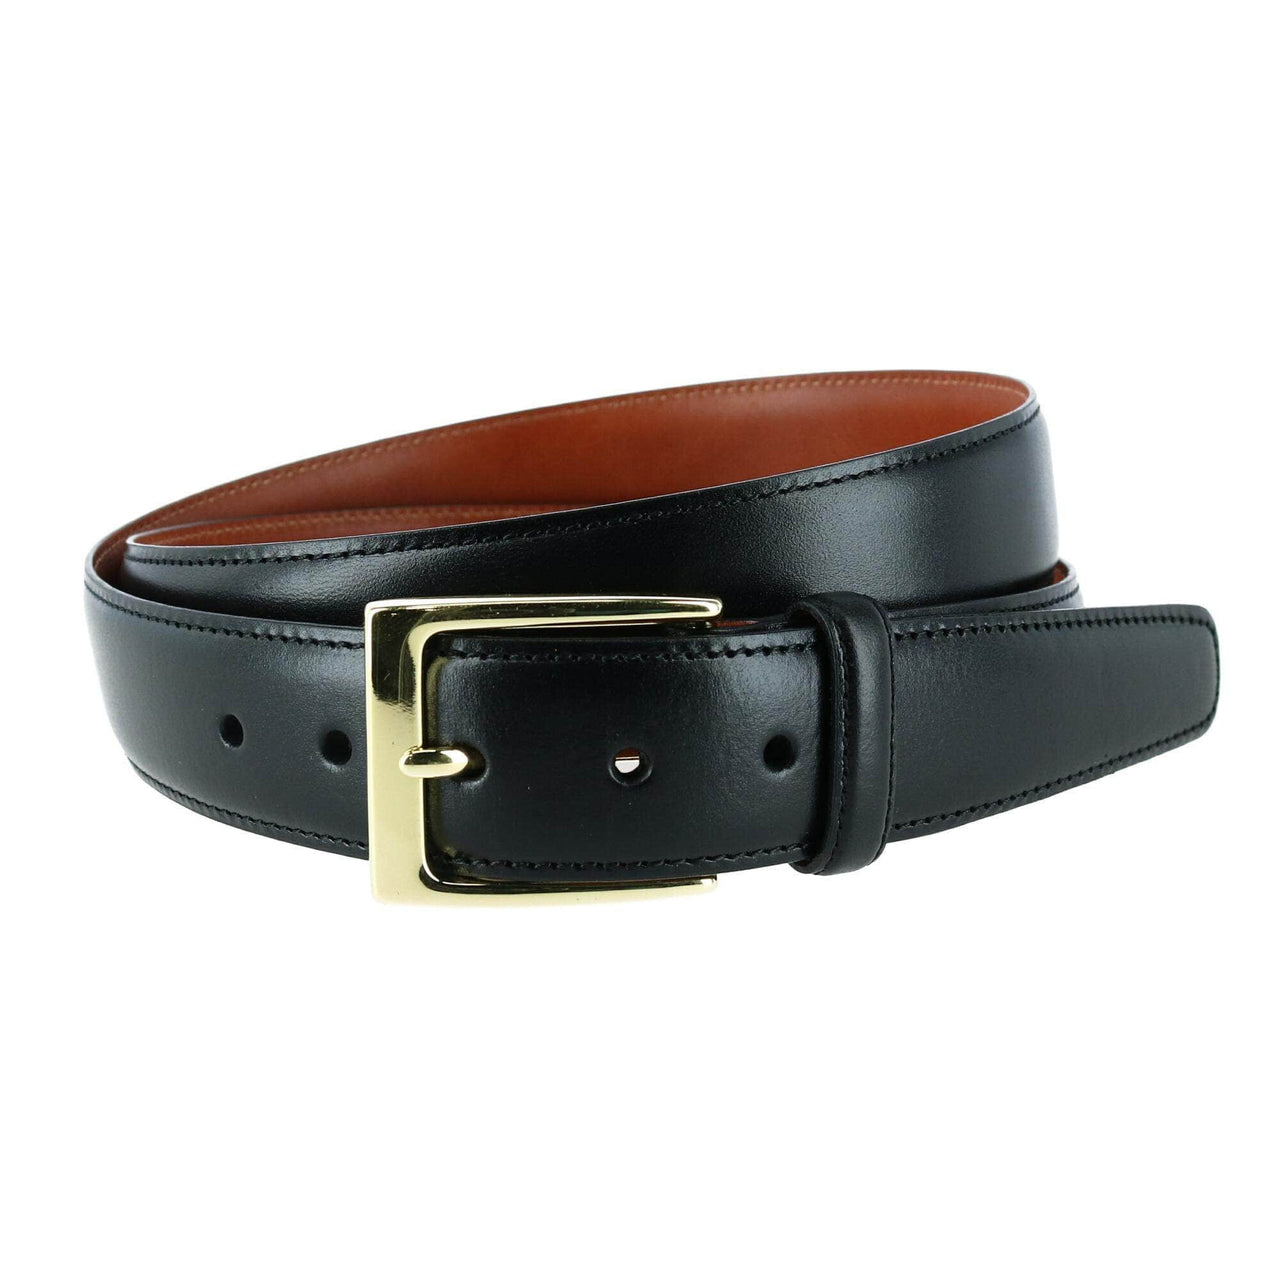 TrafalgarStore: Accessible Luxury Men's Accessories, Leather Belts